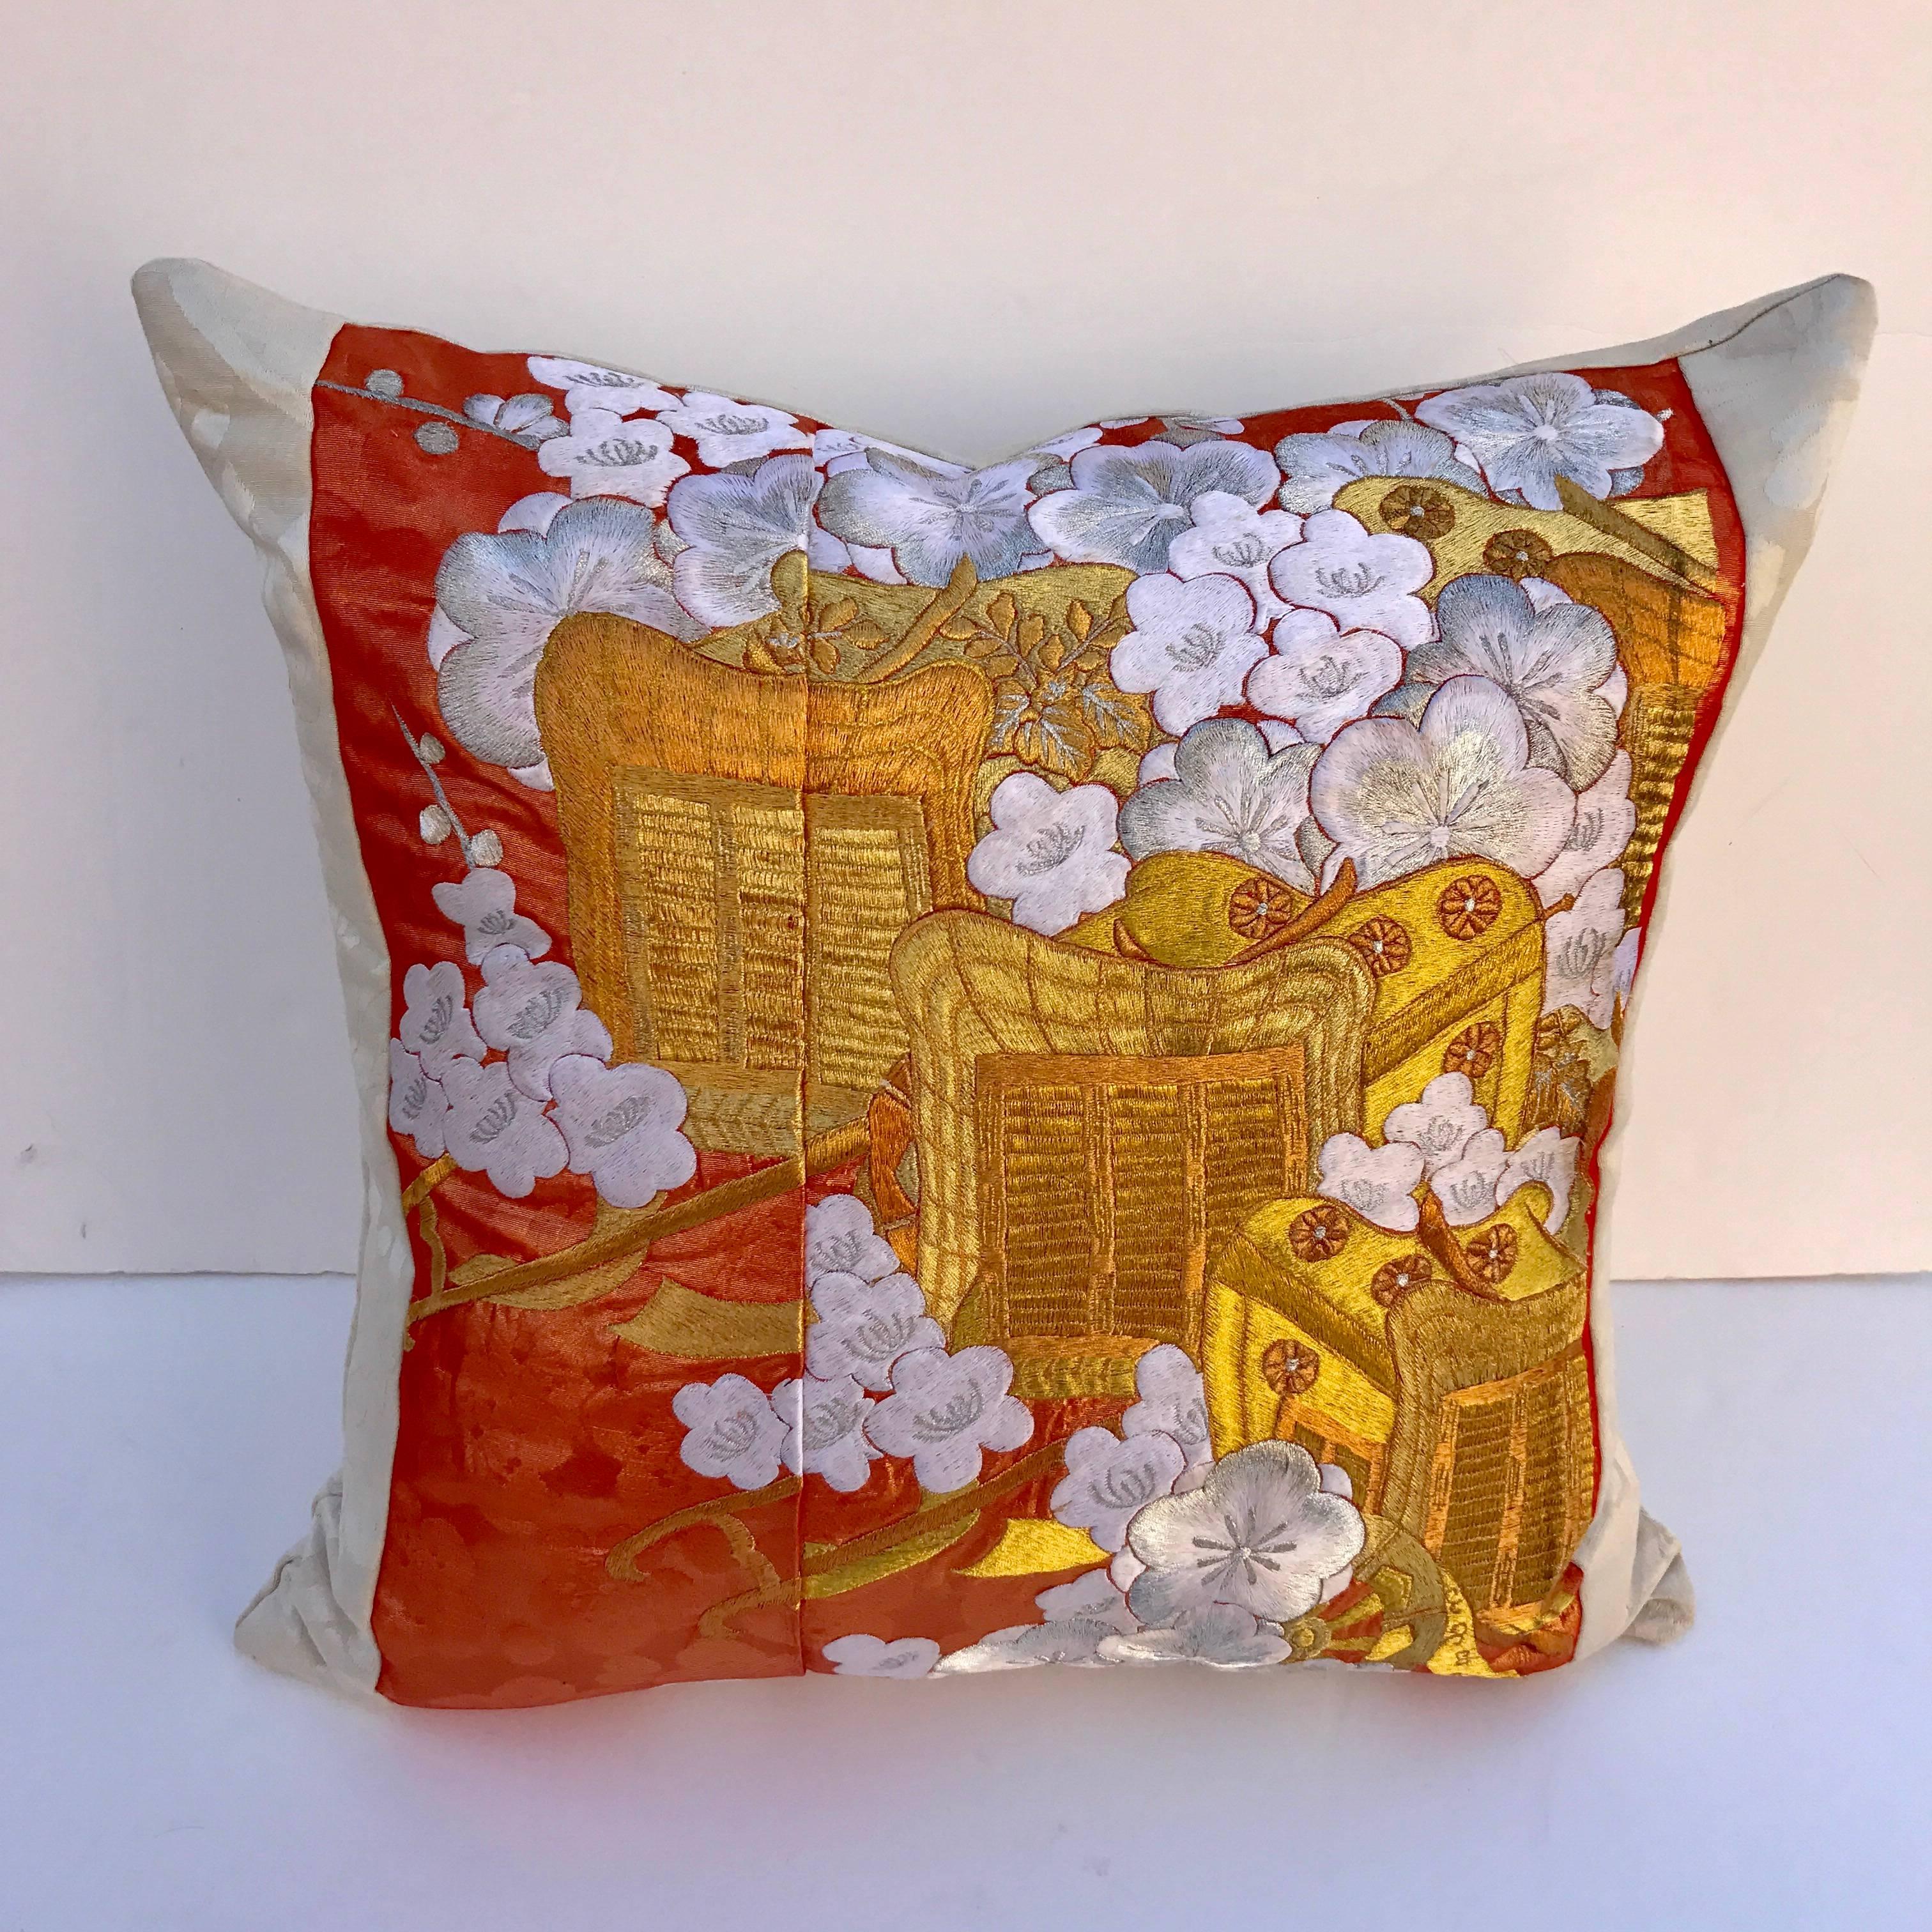 Custom pillow cut from a vintage Japanese silk Uchikake, the traditional wedding kimono. The silk panel has a gorgeous design of the royal cart with flowers embroidered with silk and metallic threads. It is faced and backed with a Scalamandre